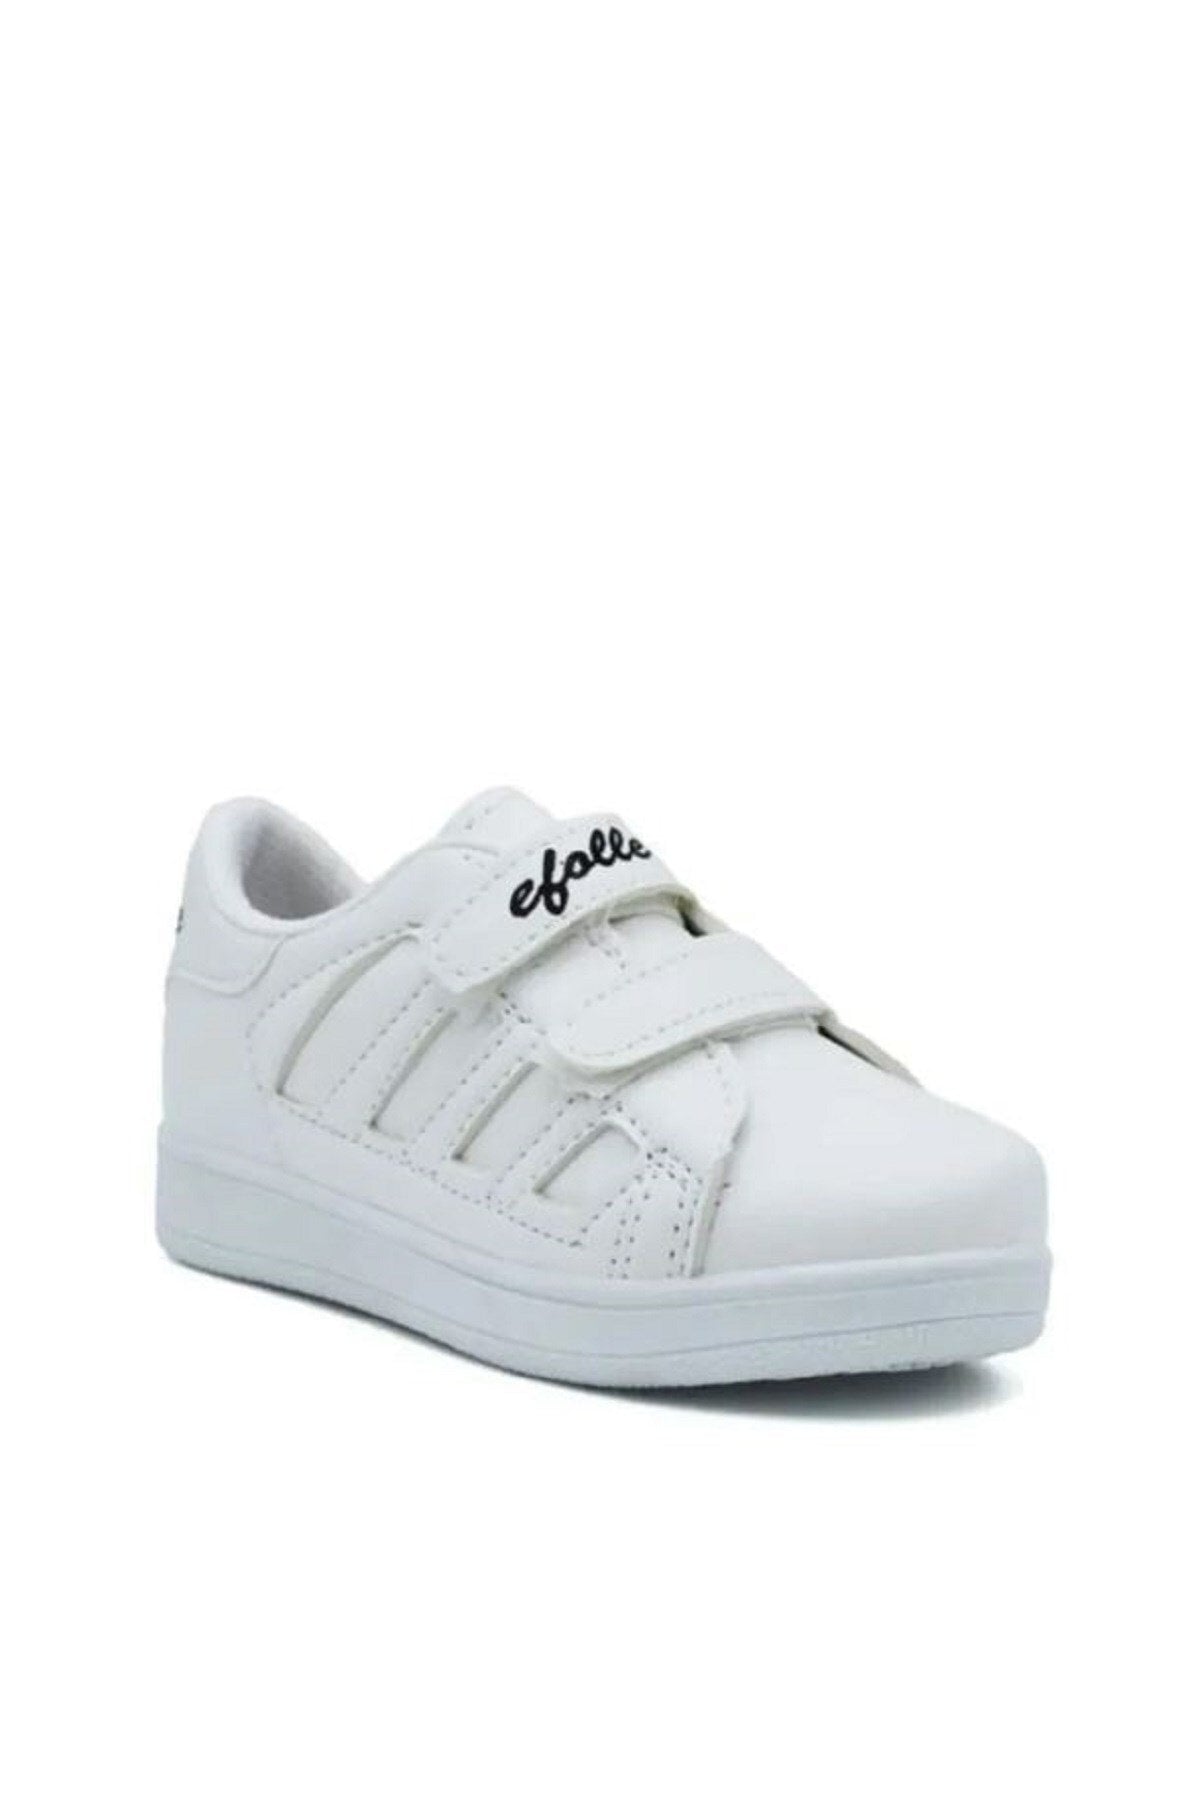 DAILY WHITE GIRLS BOY BABY BABY SMEaker Double Call Sneakers 2 4 Band Libra 1002